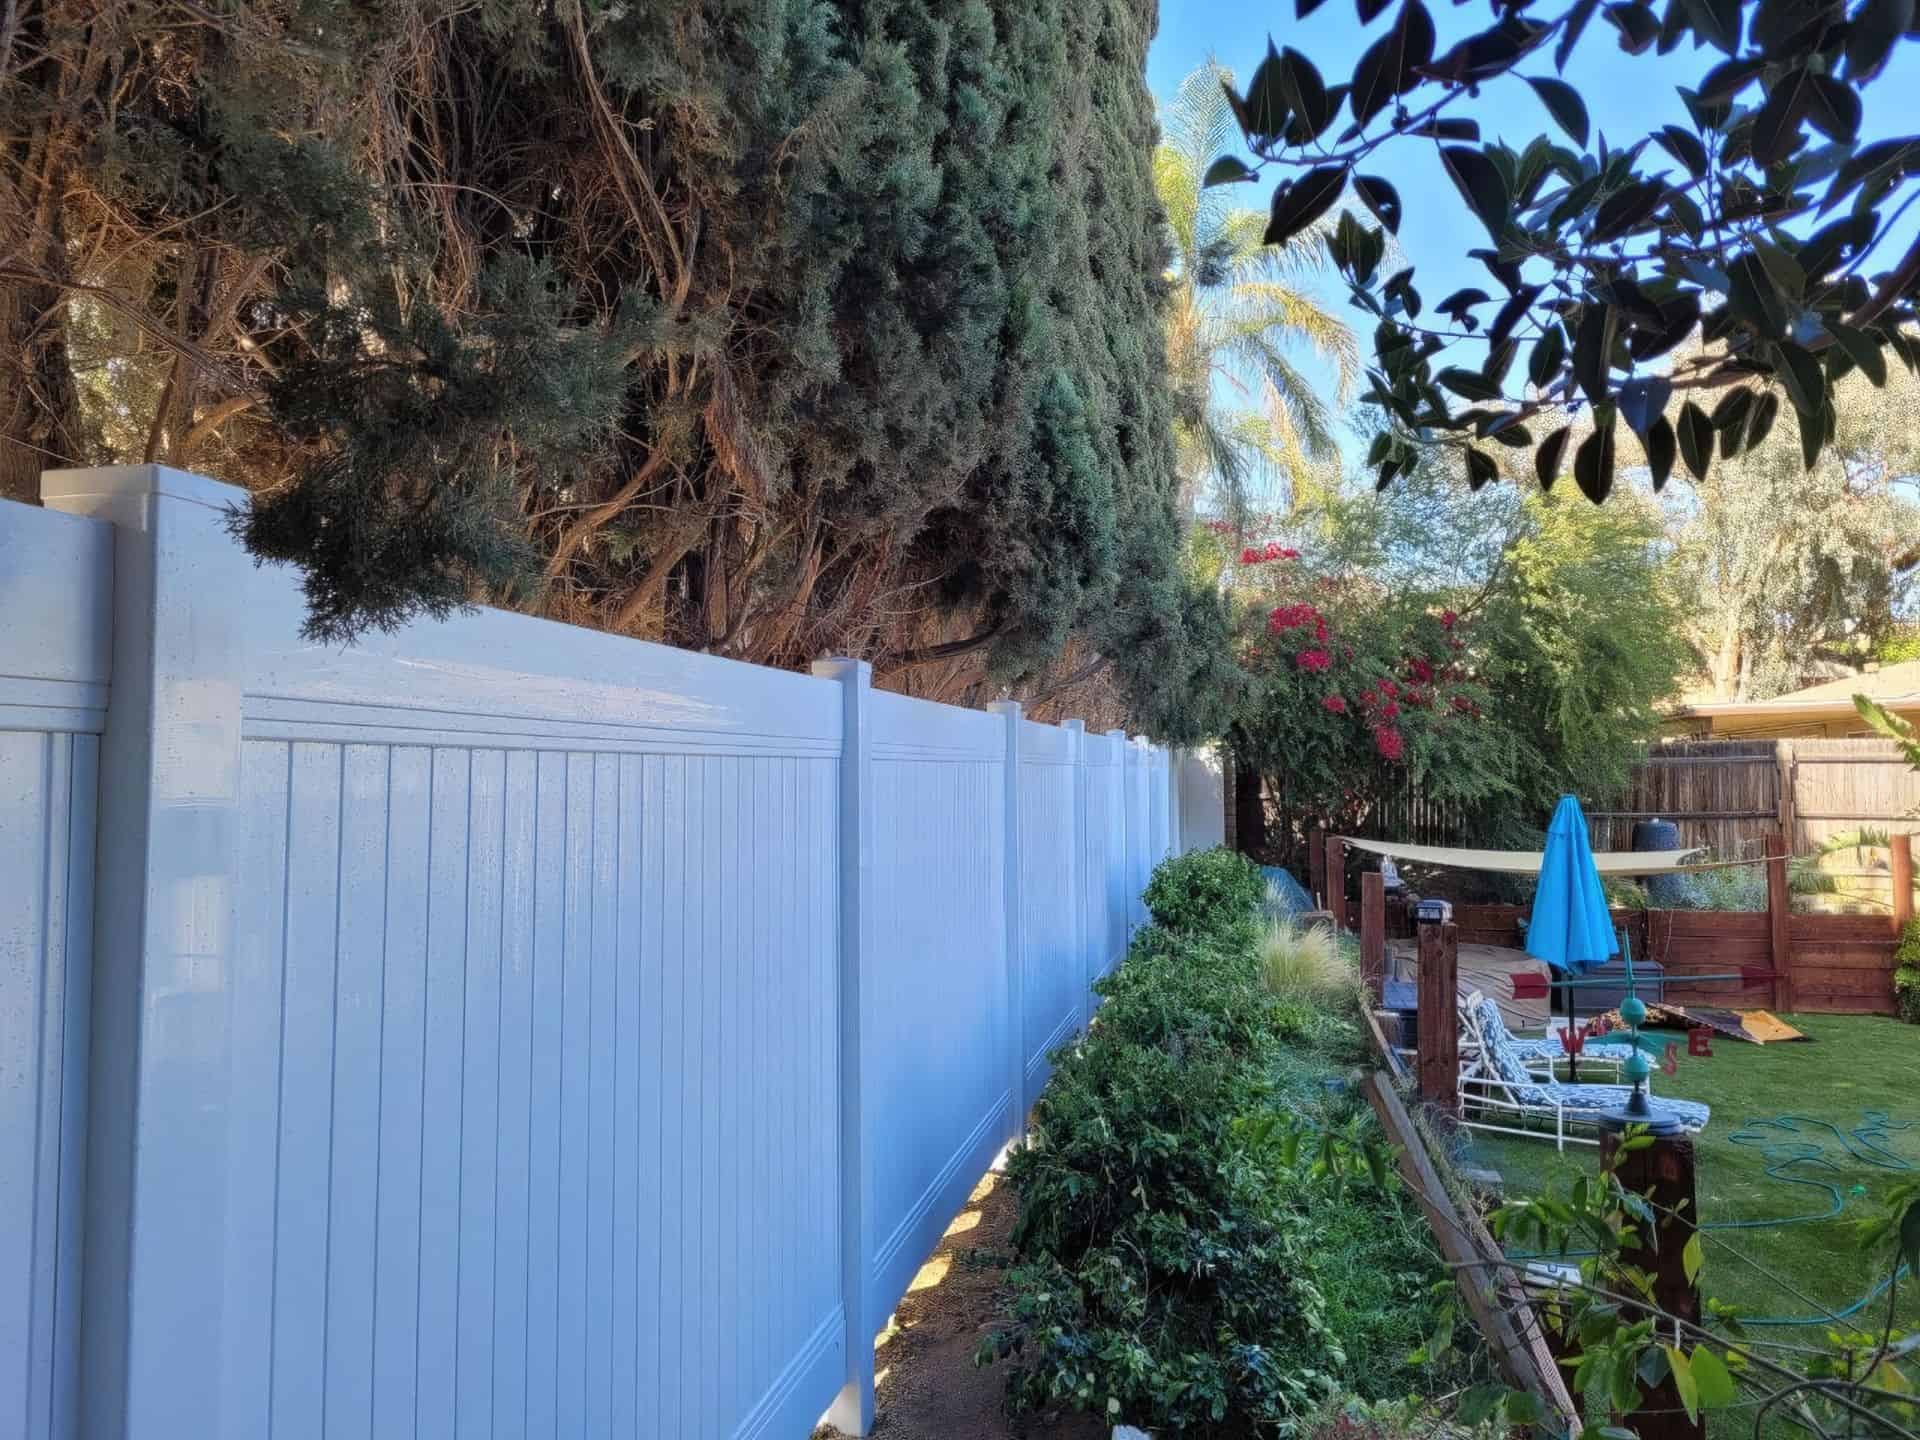 Large white vinyl fence bordering front lawn with trees and small bushes and separating it from concrete sidewalk